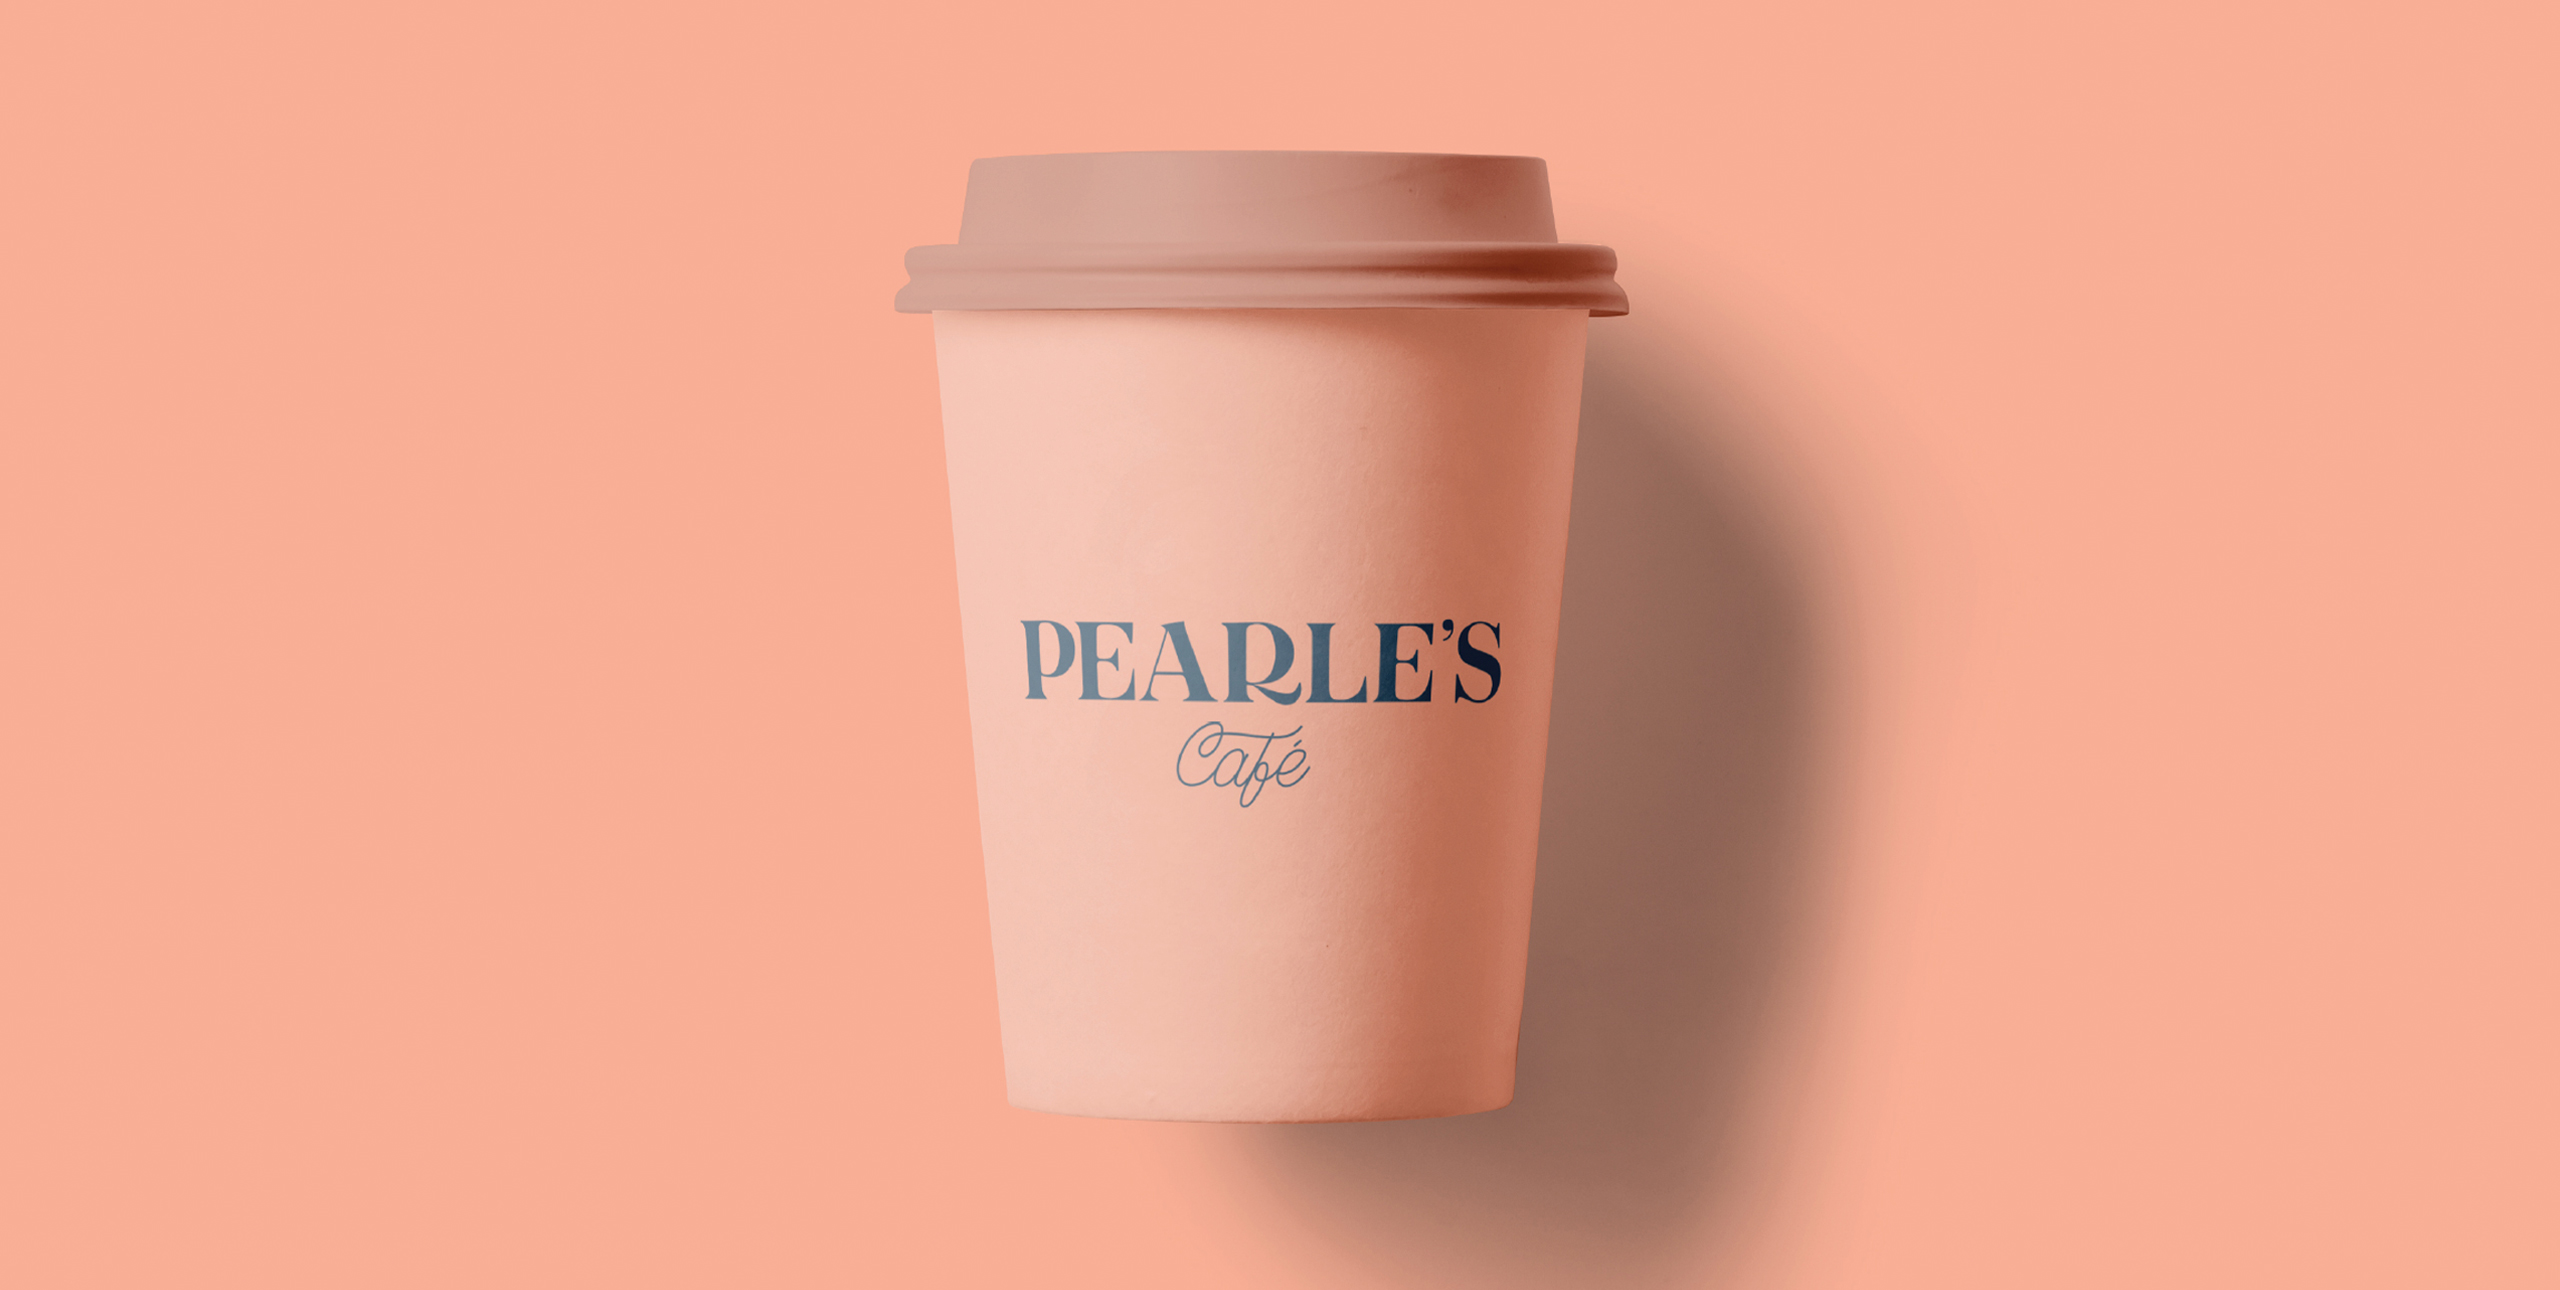 Pearle's Cafe coffee cup design